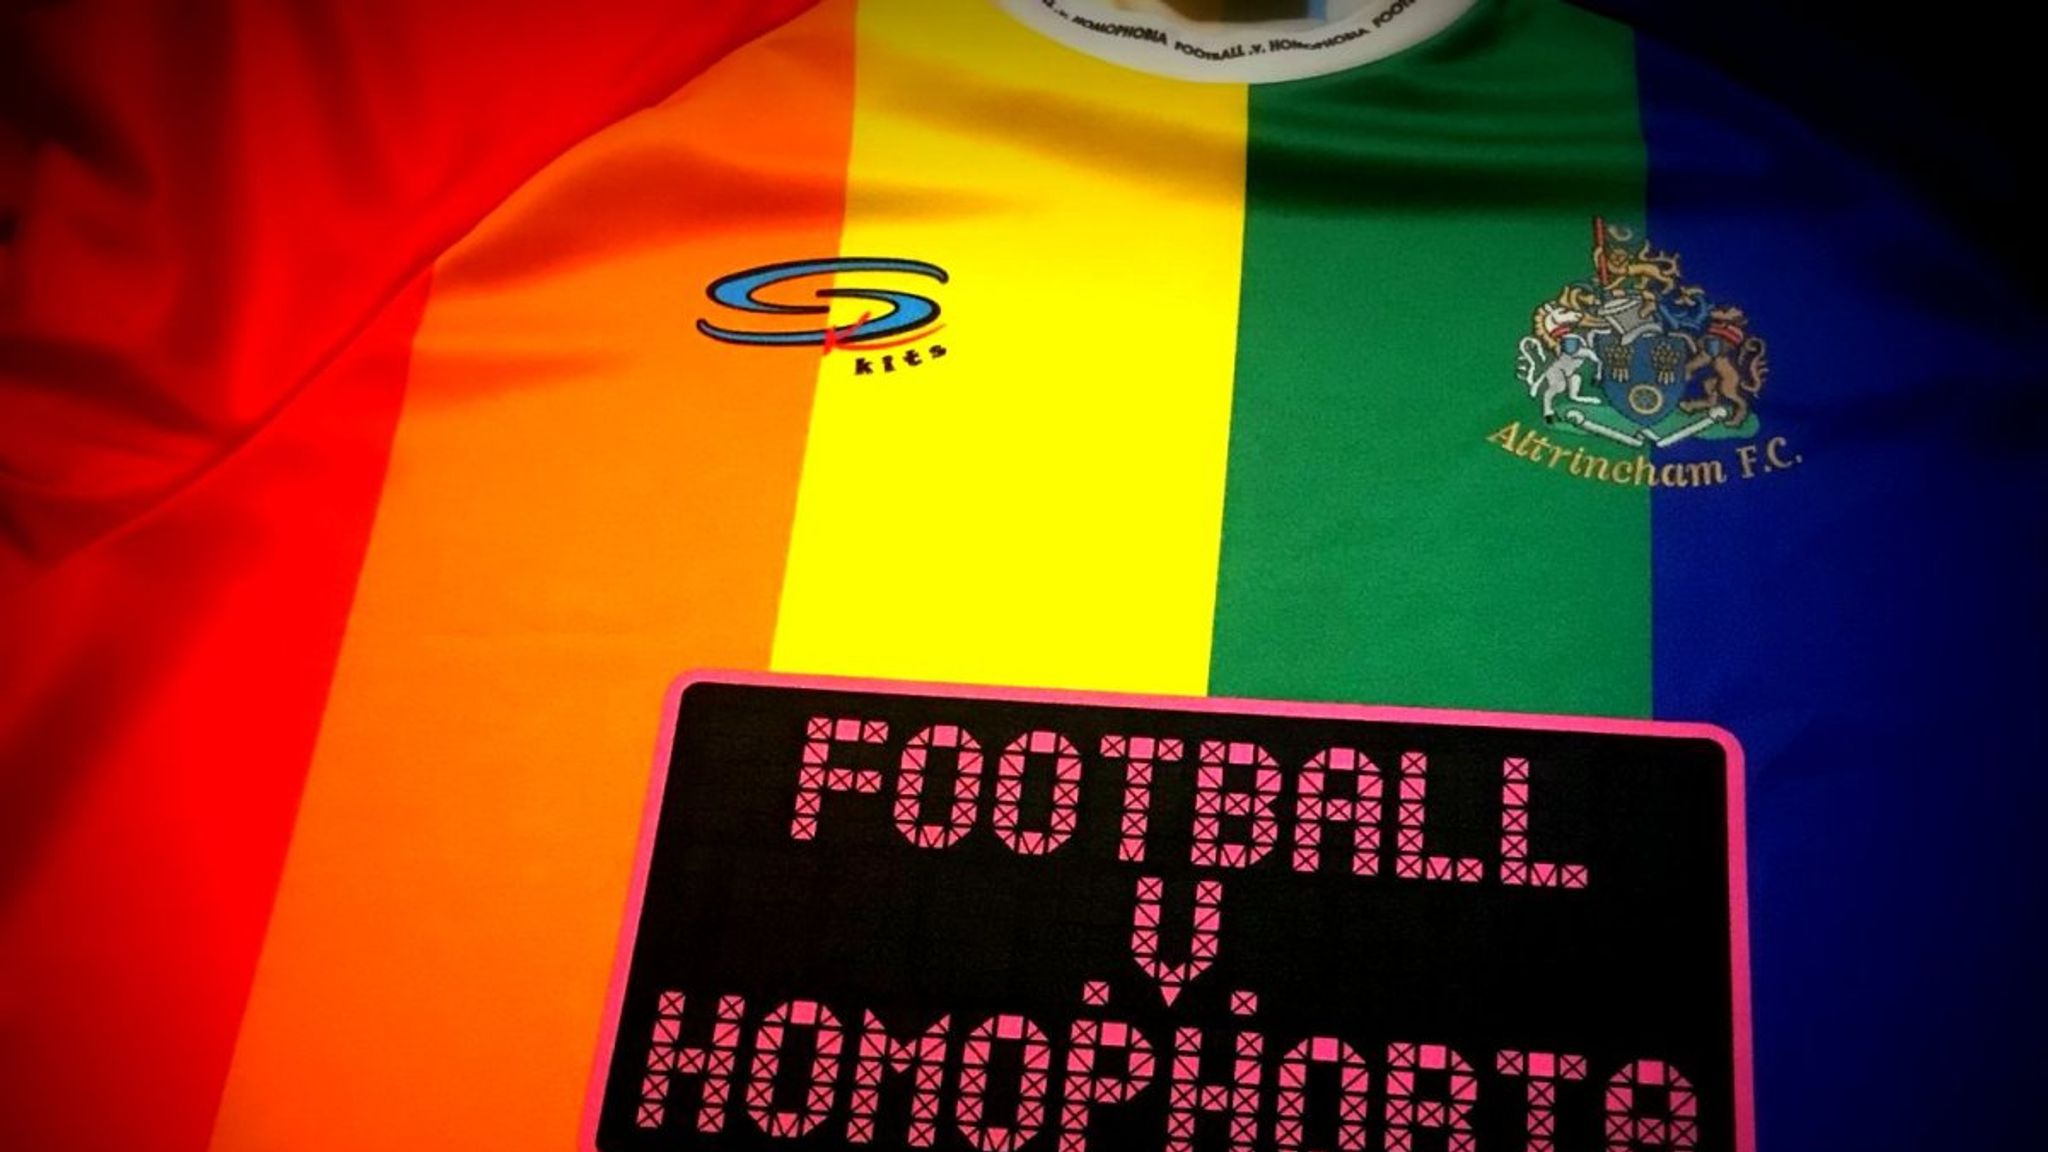 Altrincham FC promotes inclusion, diversity with LGBT flag-based kit